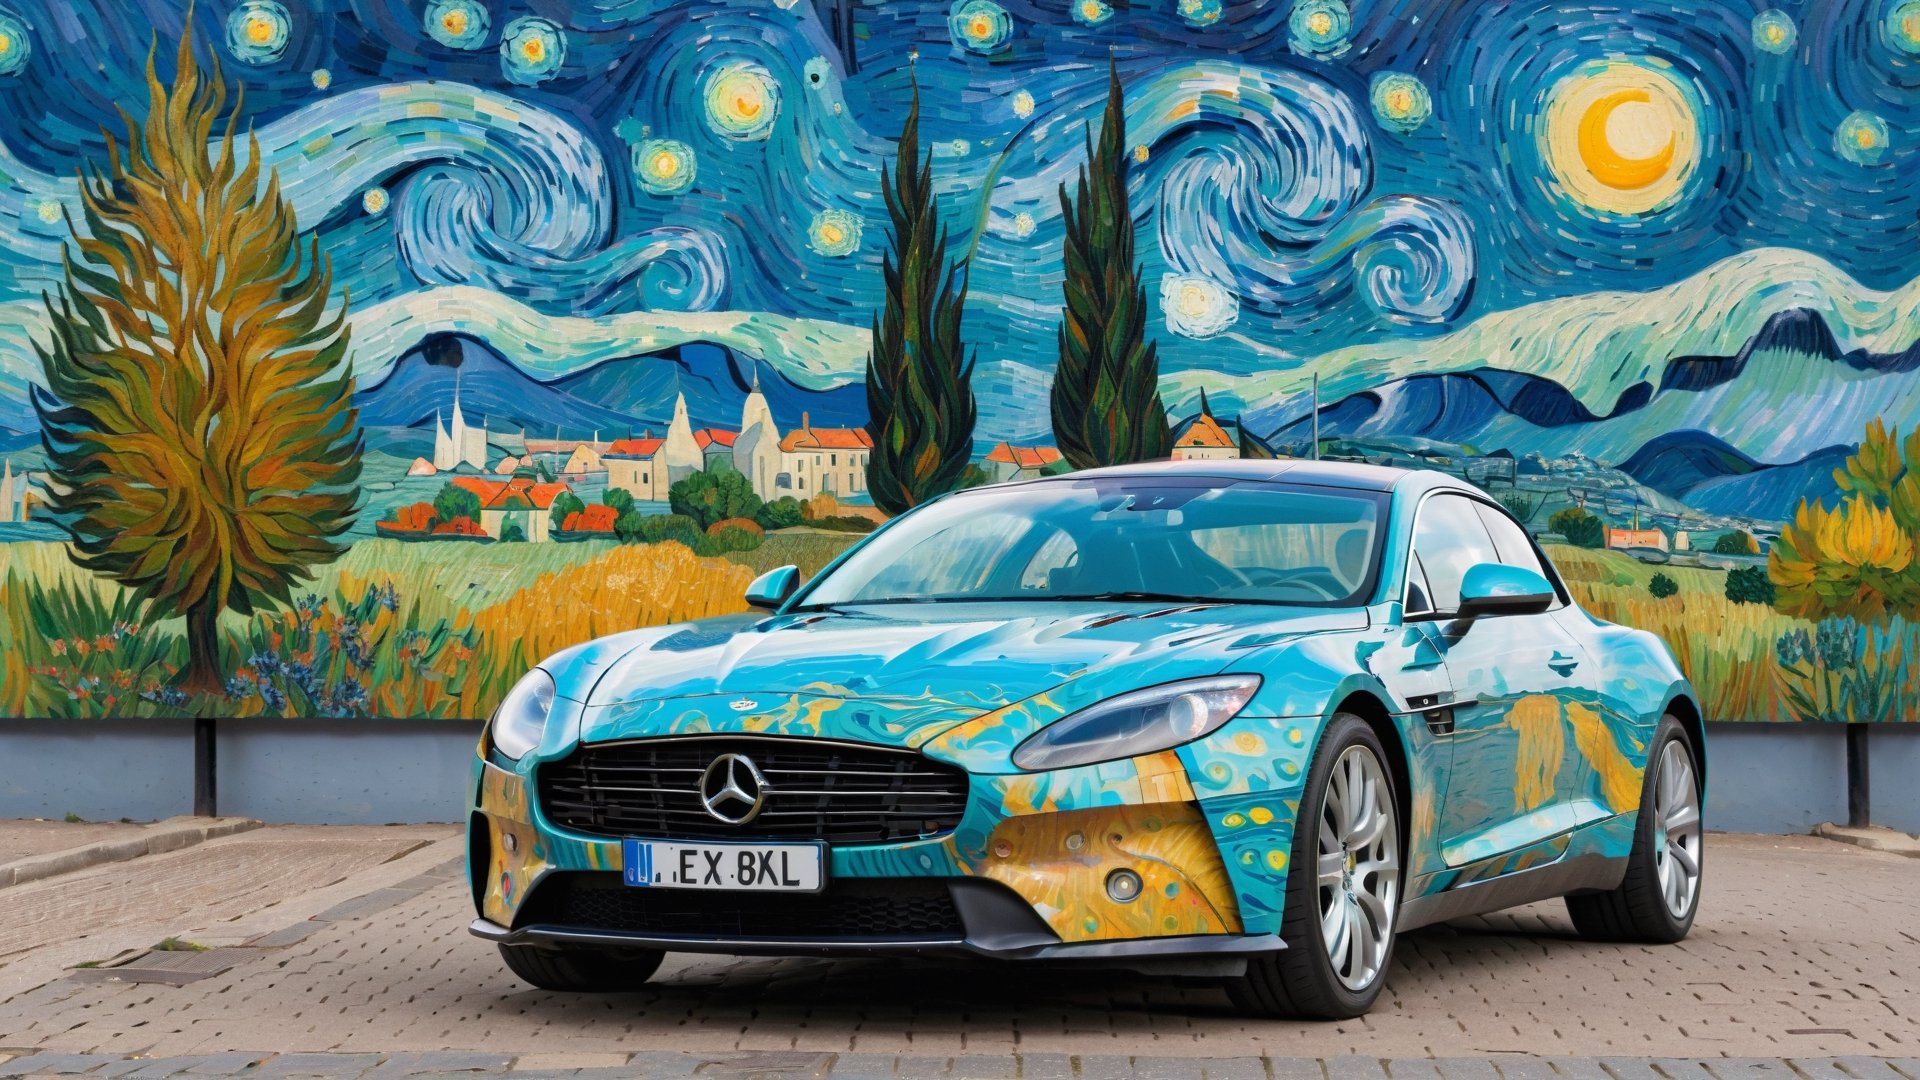 A Mersedes inspired by Matrix, parked in city area background, perspective view, symmetrical, (car painted in style of Vincent van Gogh):1,more detail XL